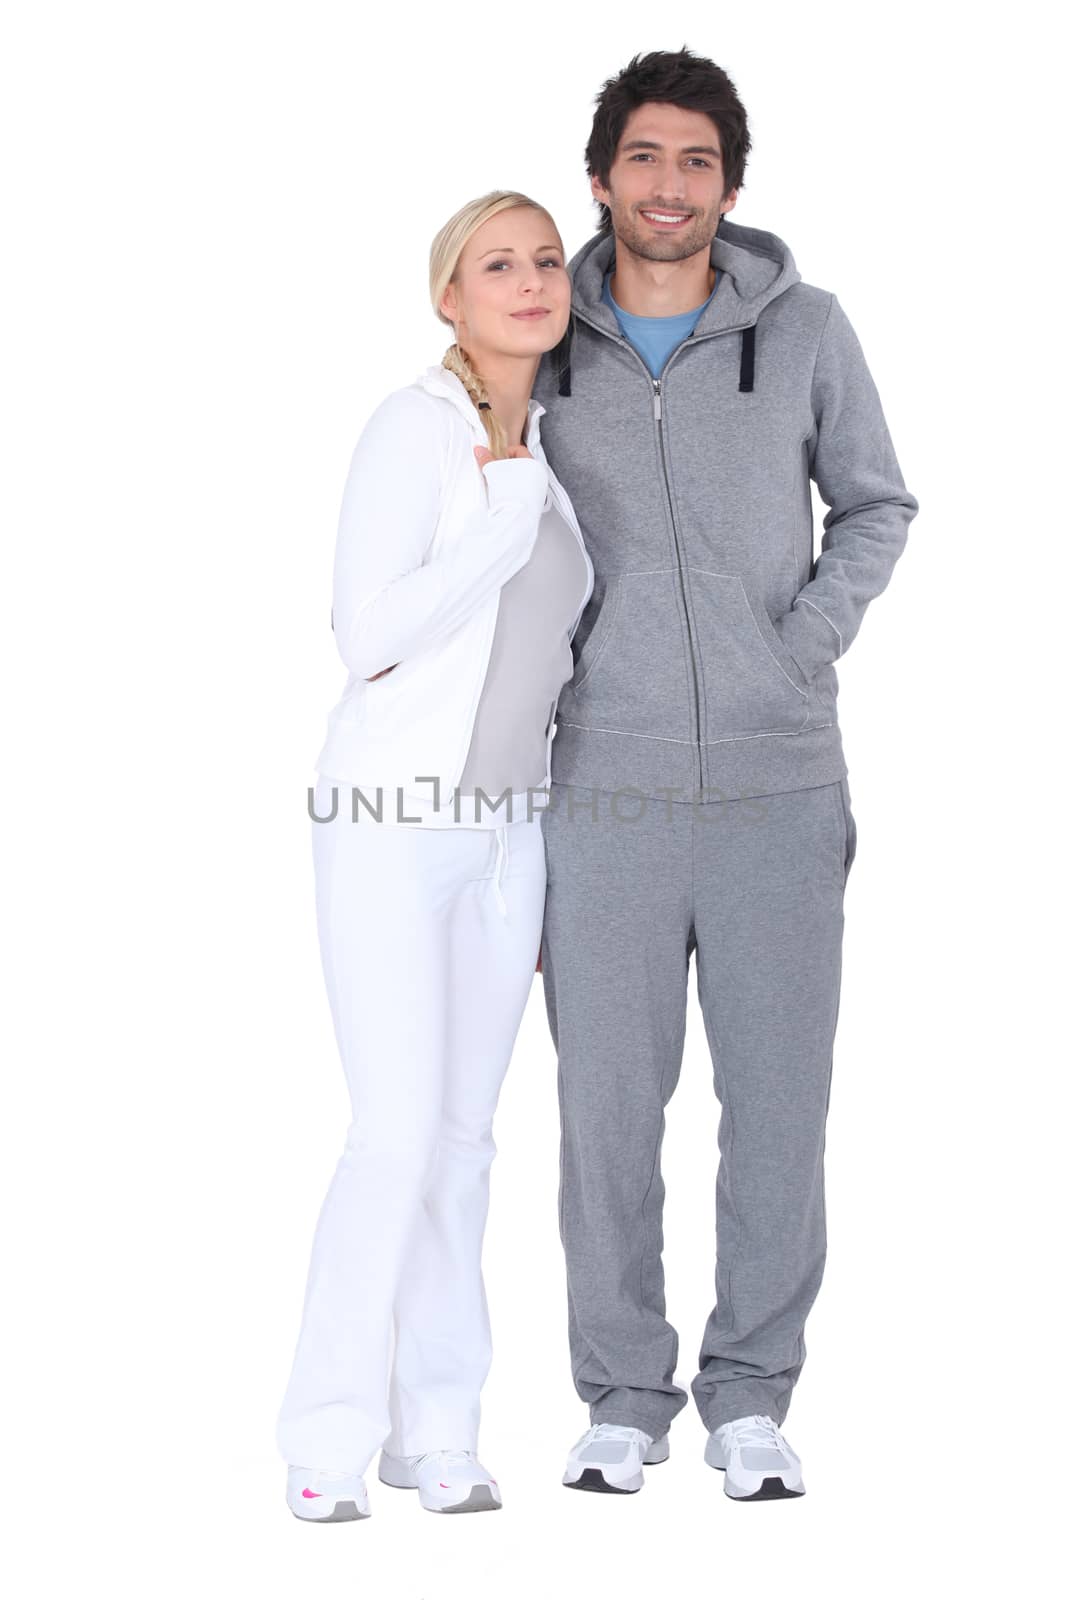 a couple wearing sport suits by phovoir